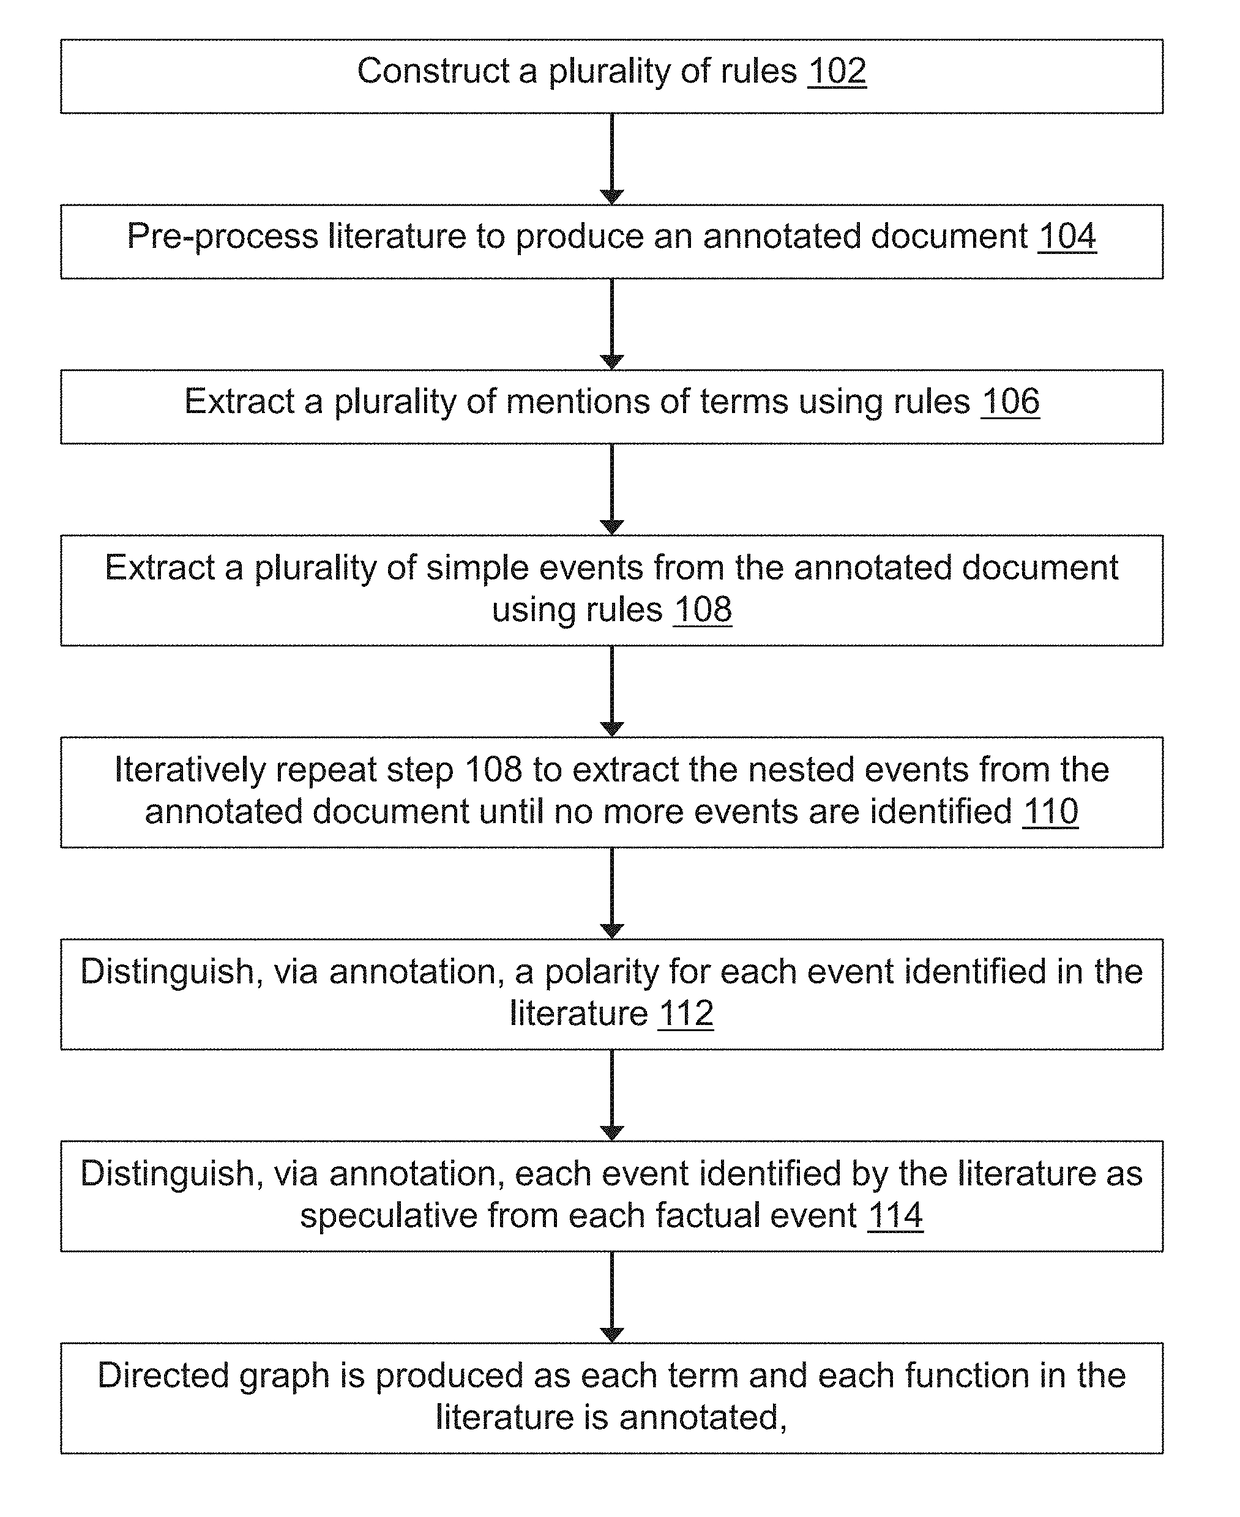 Methods for extracting and assessing information from literature documents